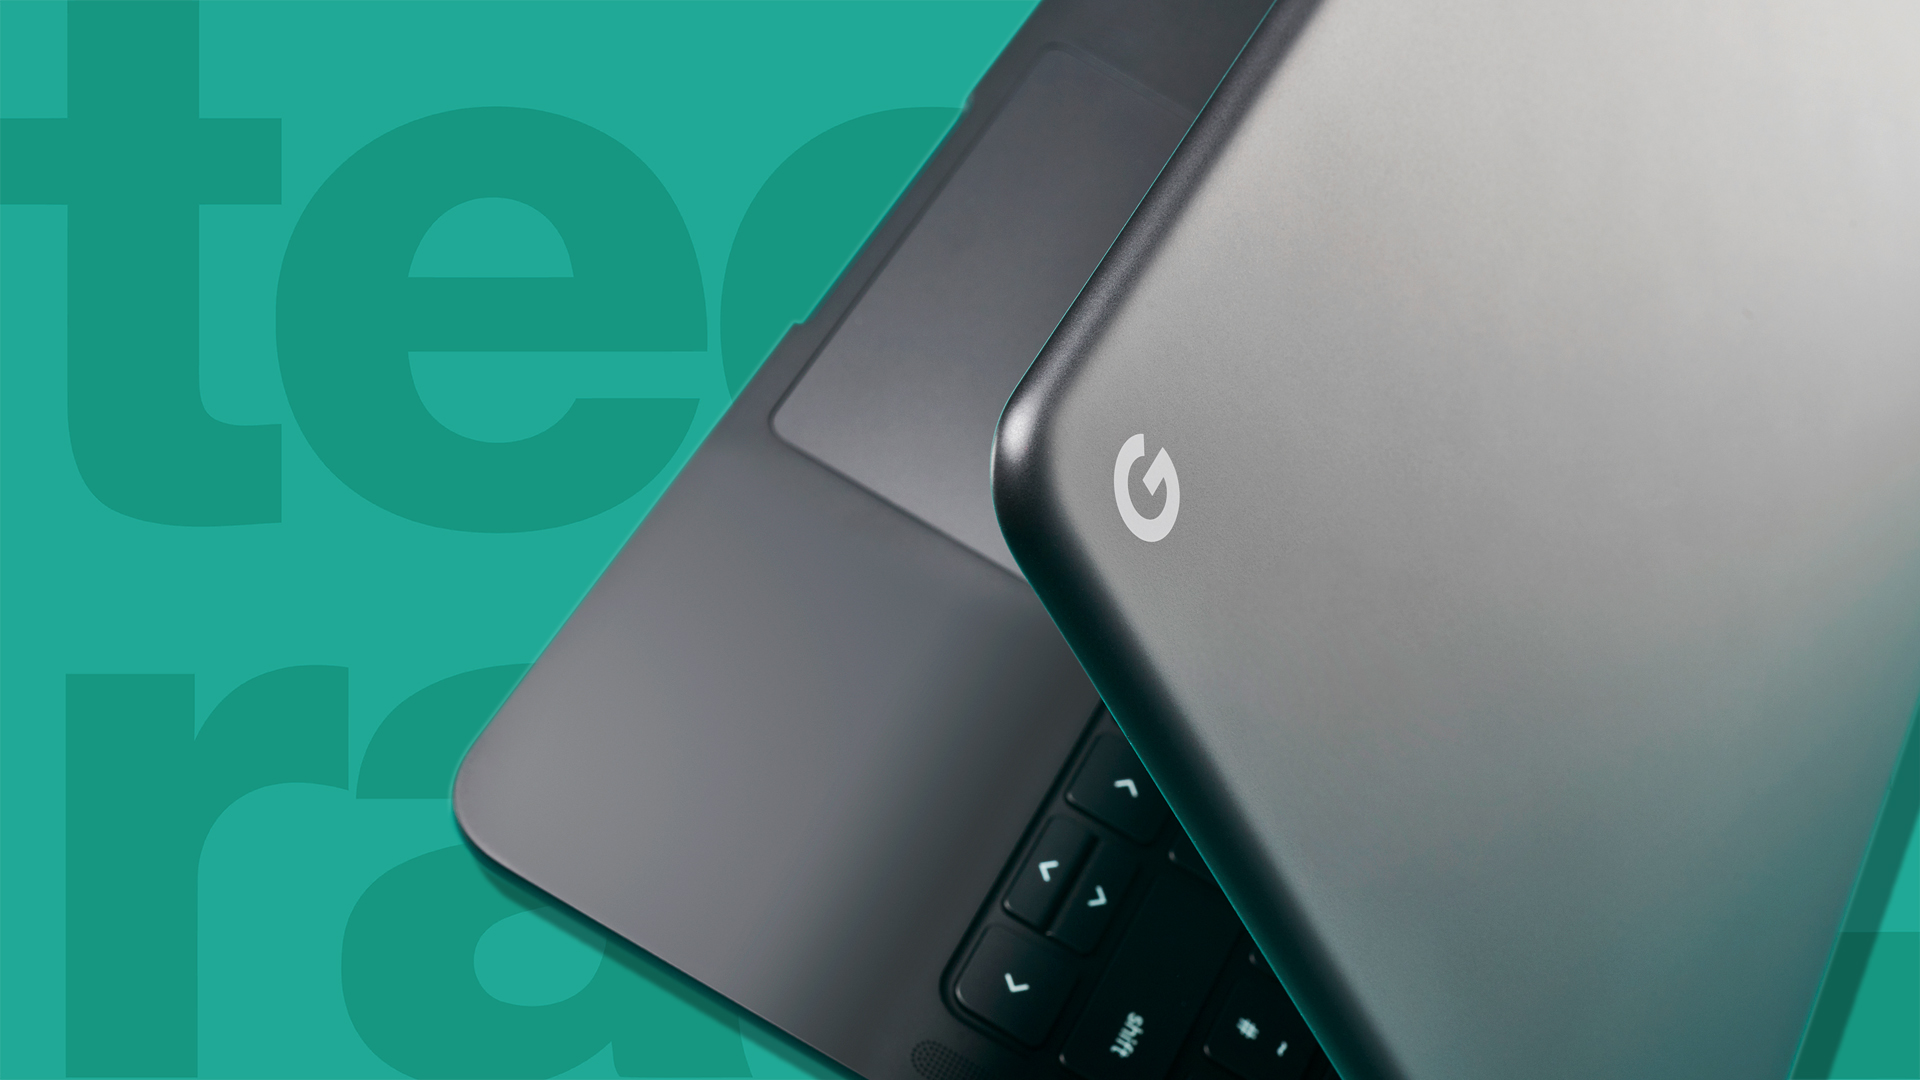 The 22 Best Chrome Extensions for Chromebooks in 2023